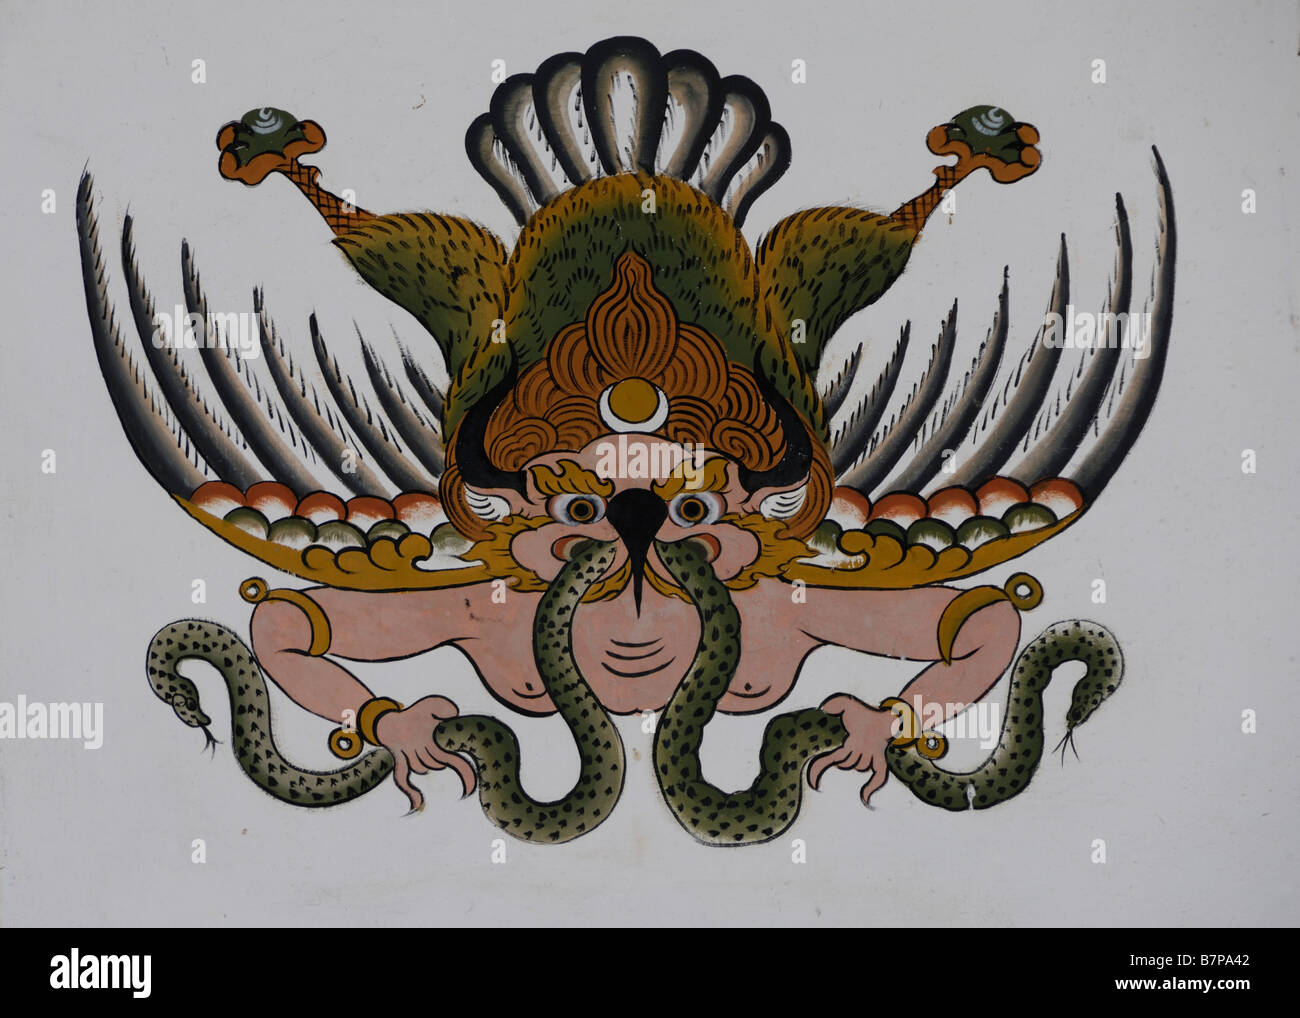 representation-of-the-immortal-garuda-with-a-snake-in-his-beak-painted-B7PA42.jpg